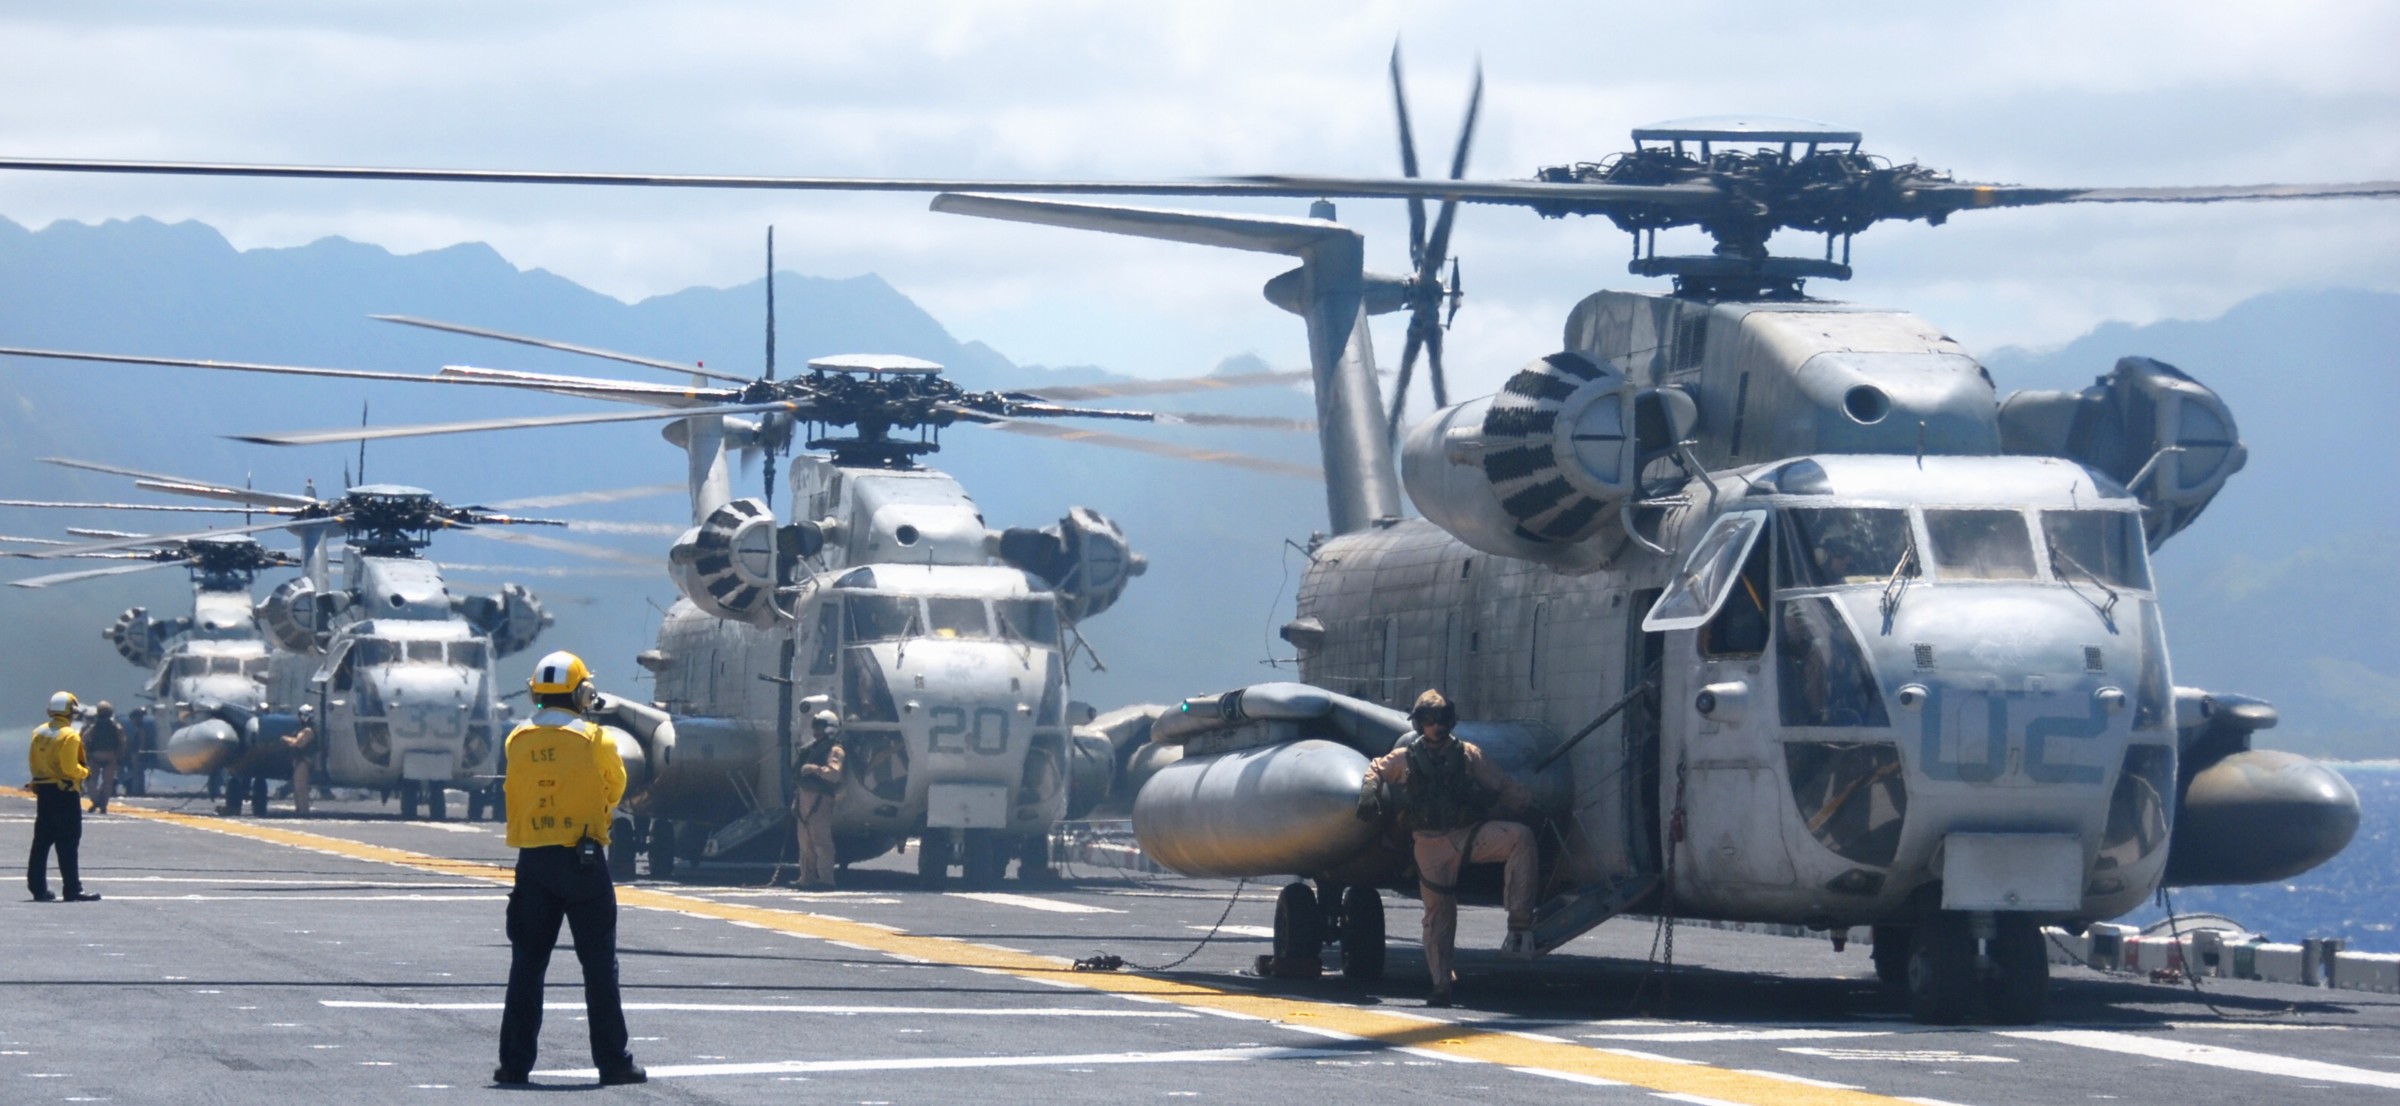 hmh-362 ugly angels marine heavy helicopter squadron usmc sikorsky ch-53d sea stallion 11